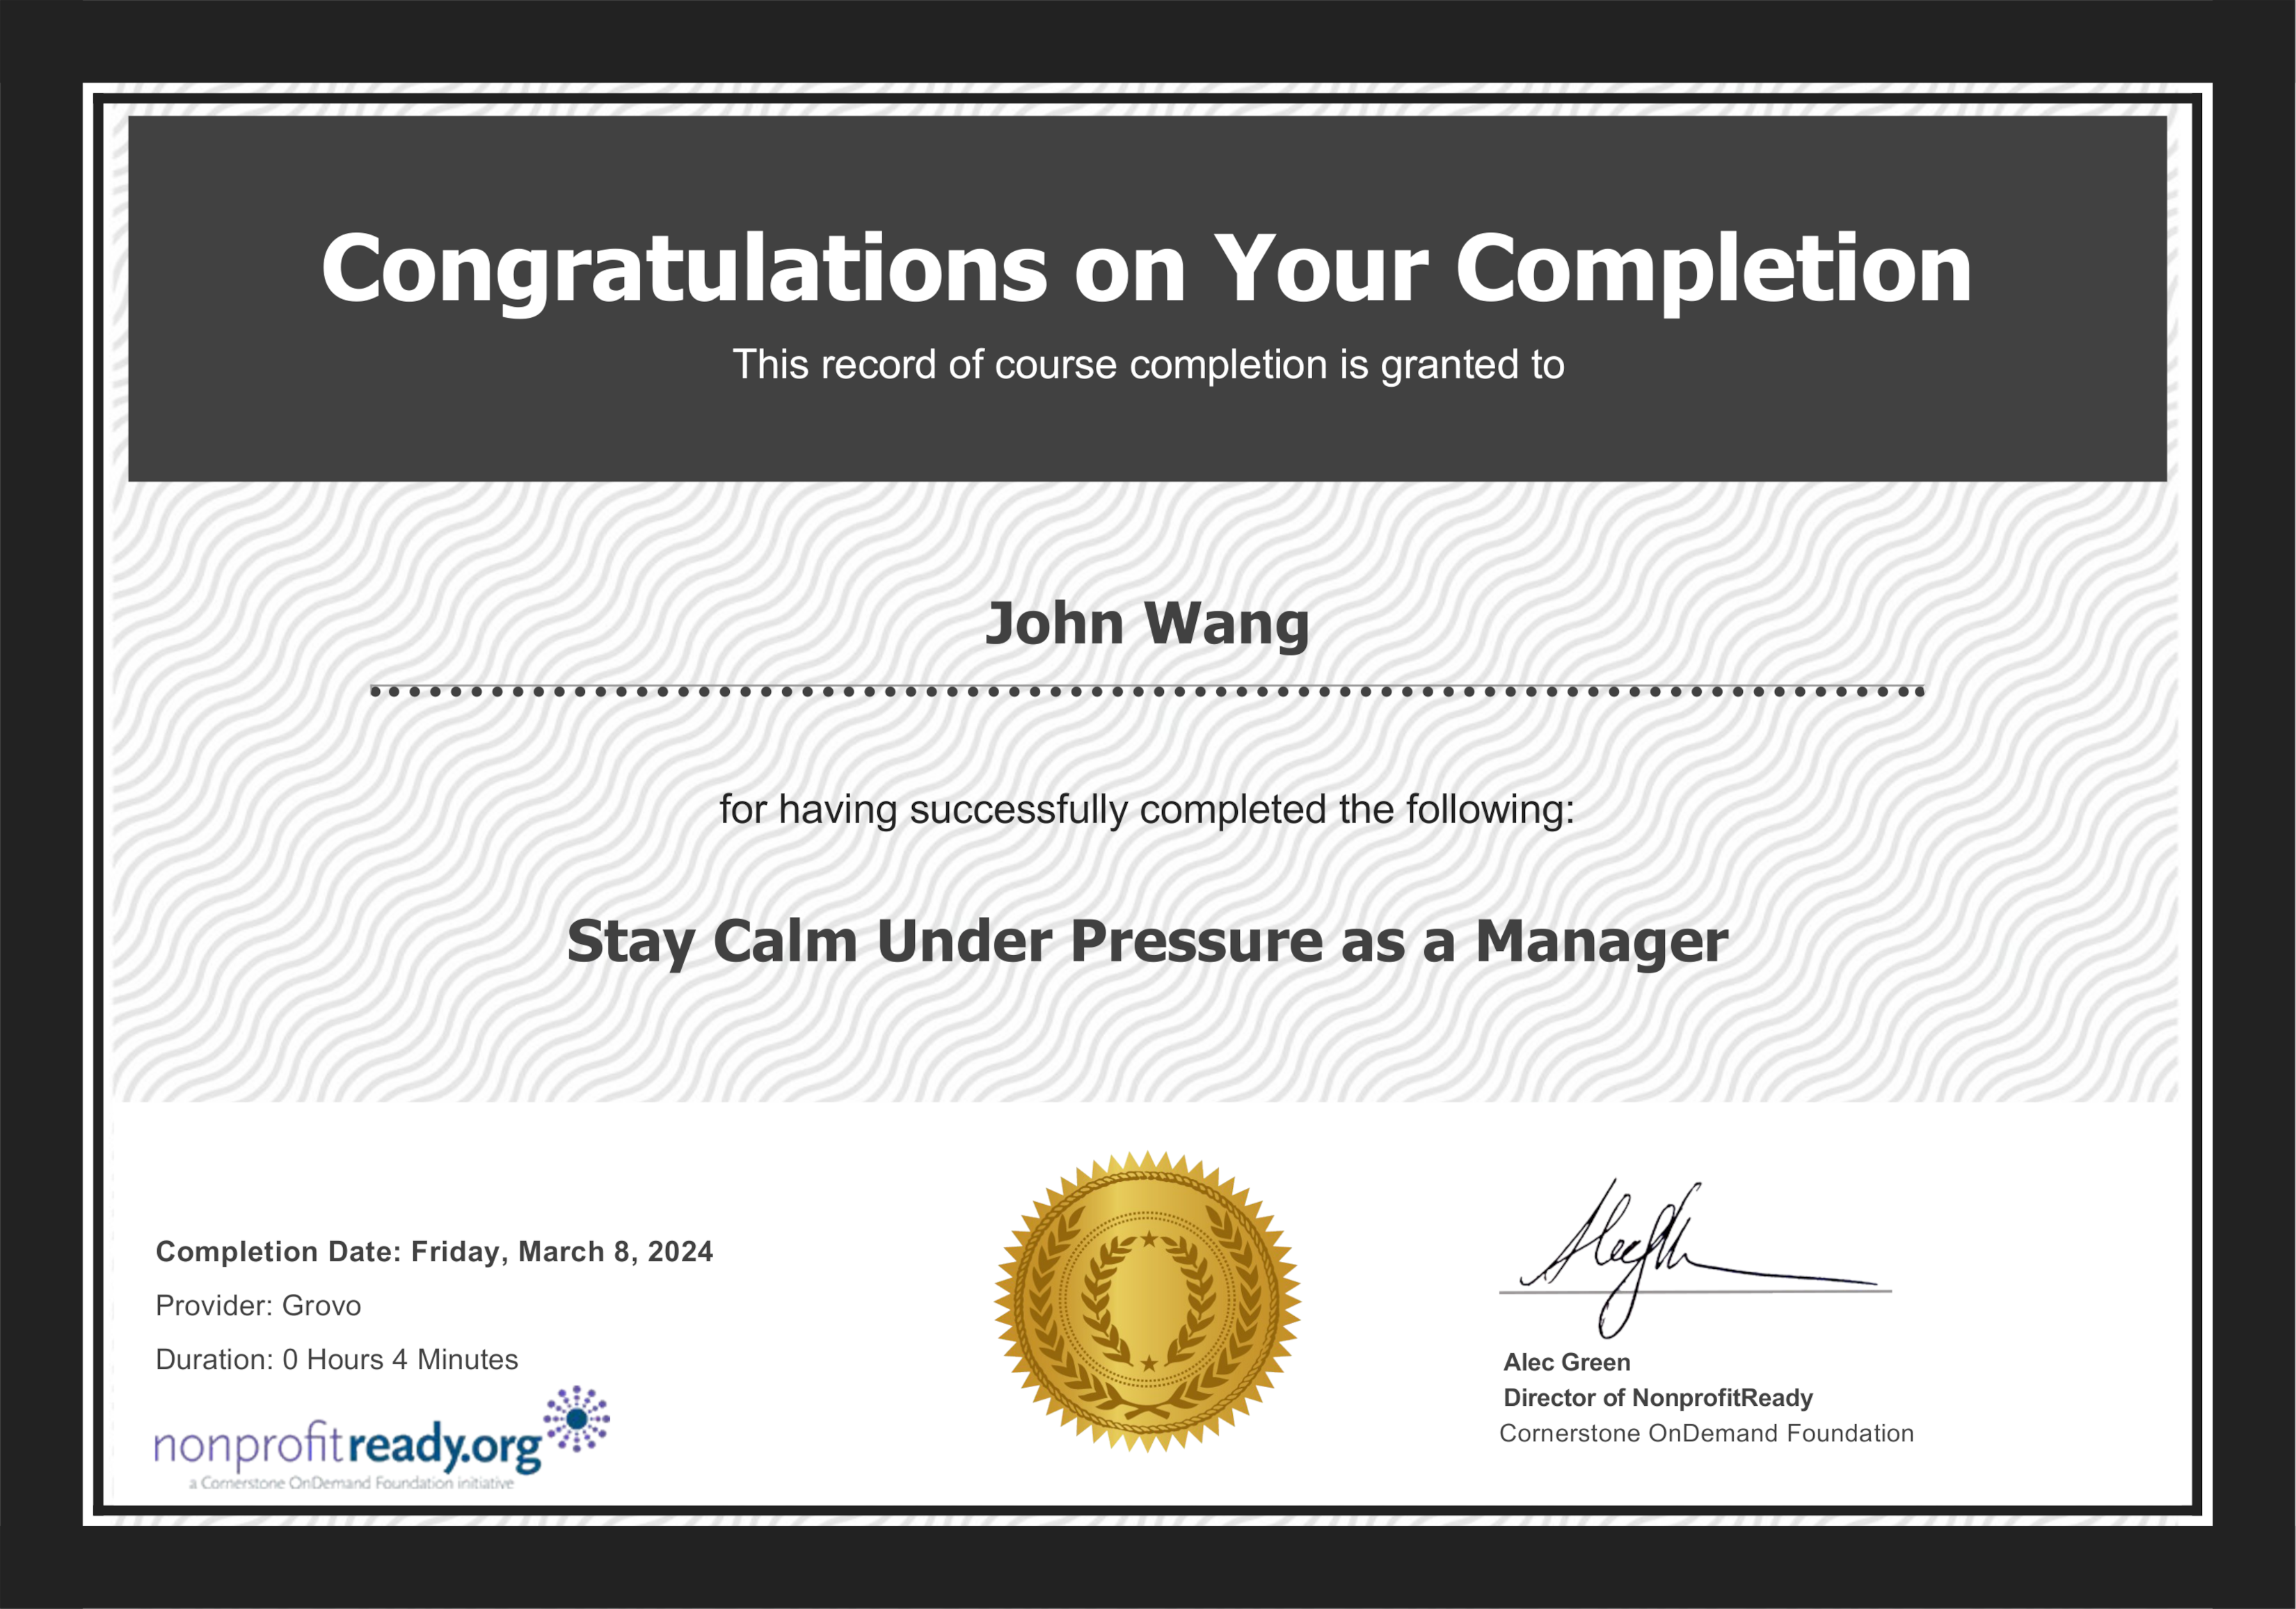 John's Stay Calm Under Pressure as a Manager from NonprofitReady by Grovo